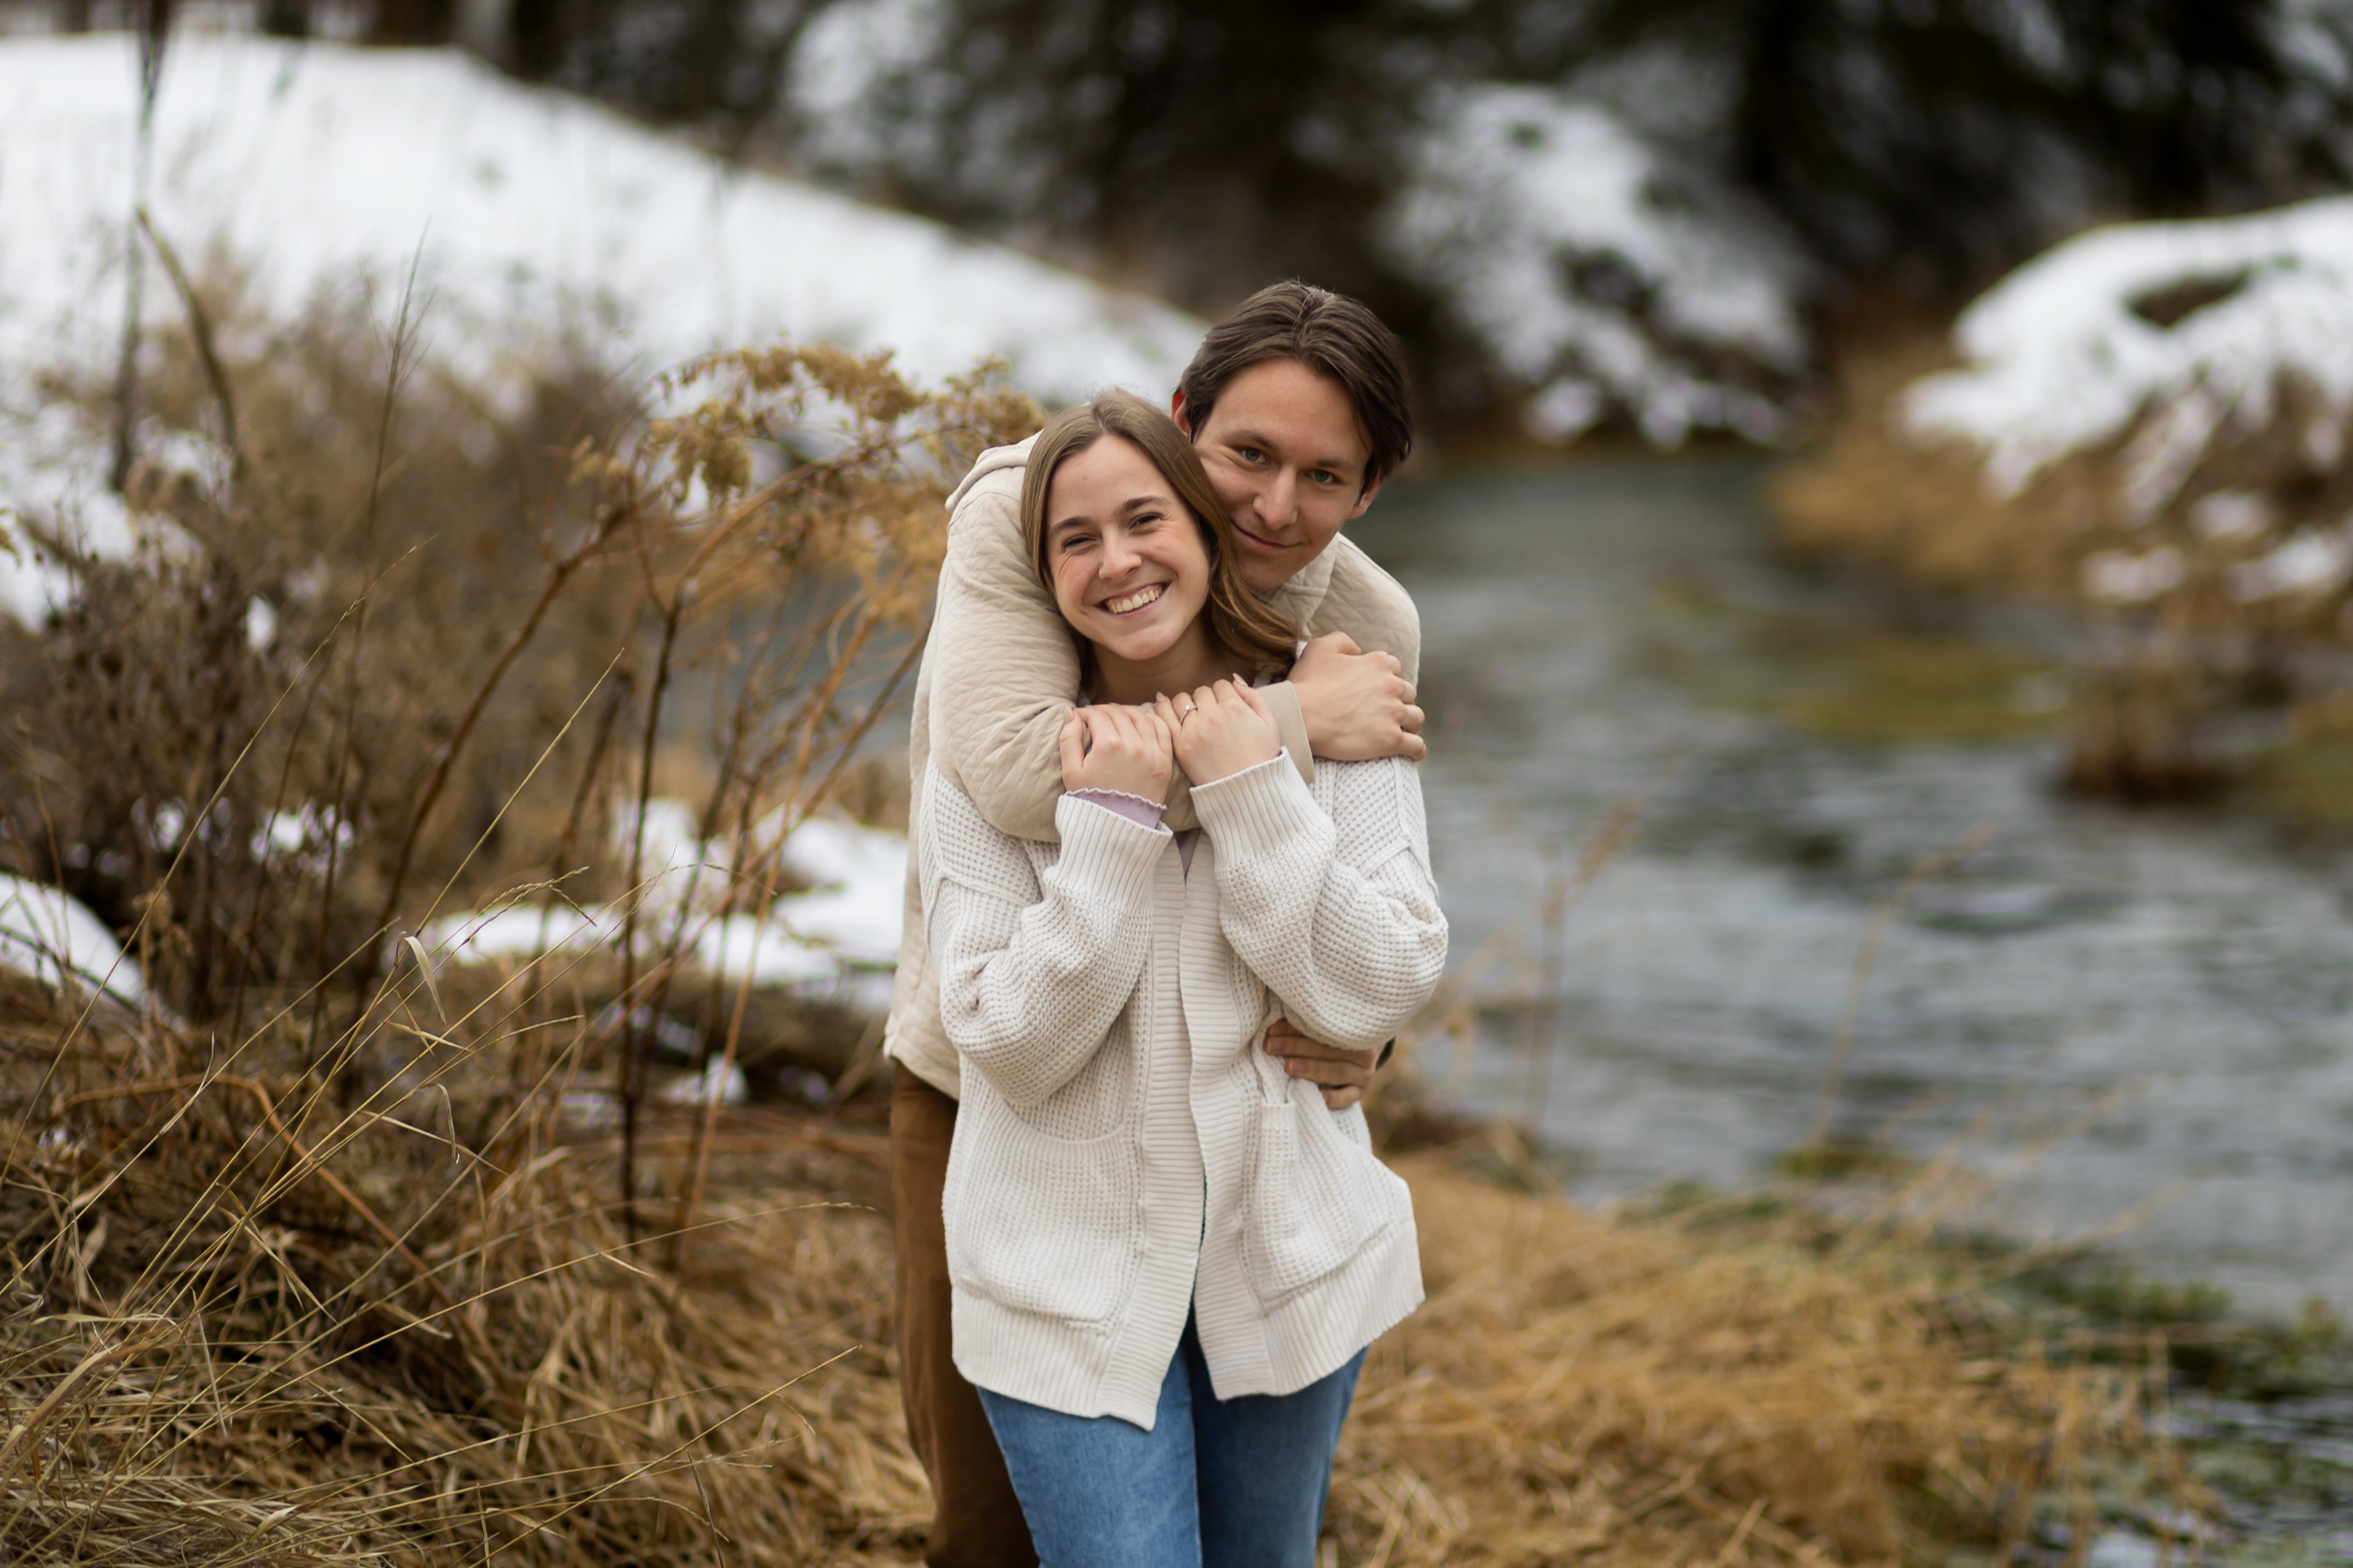 The Wedding Website of Claire Tegtmeier and Jonah San Miguel